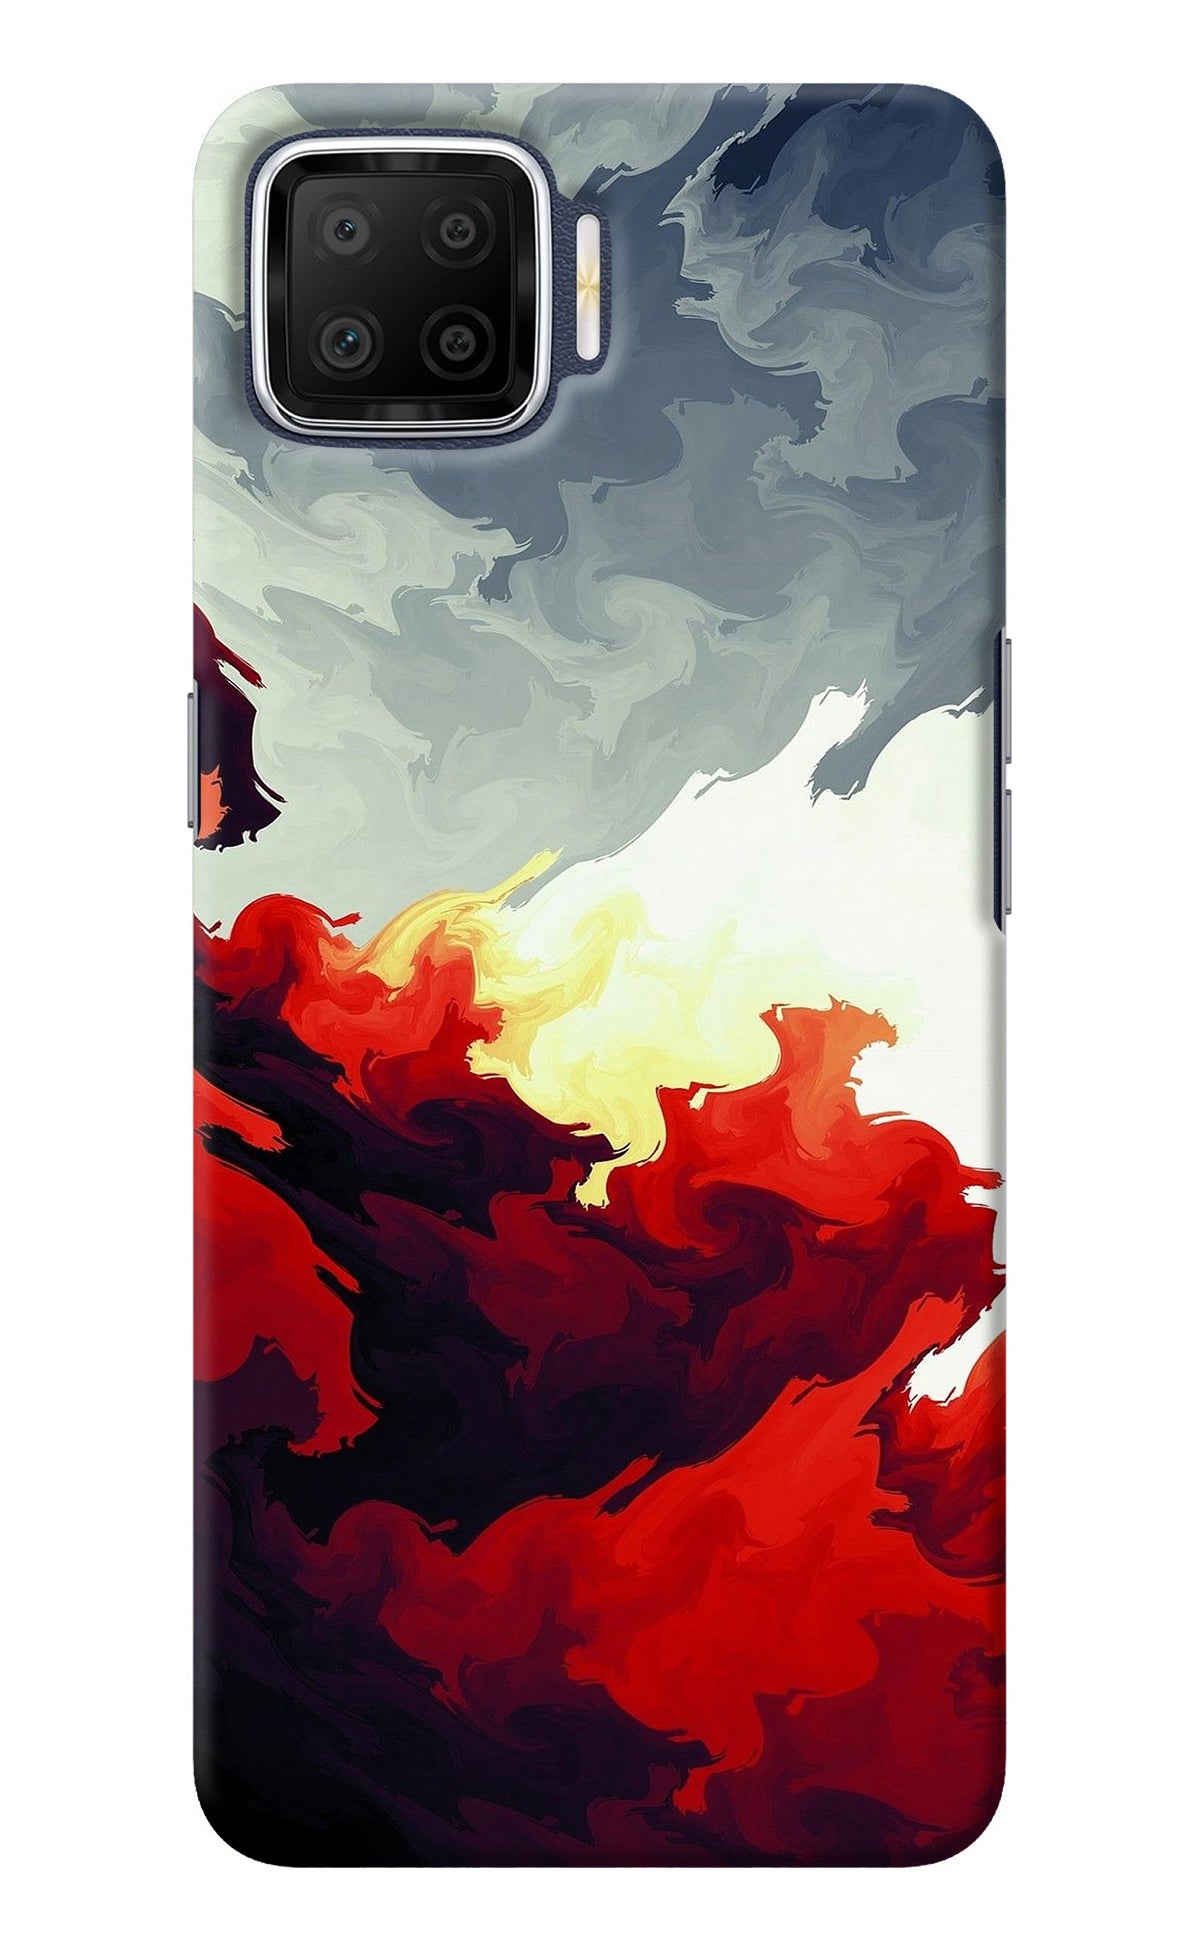 Fire Cloud Oppo F17 Back Cover